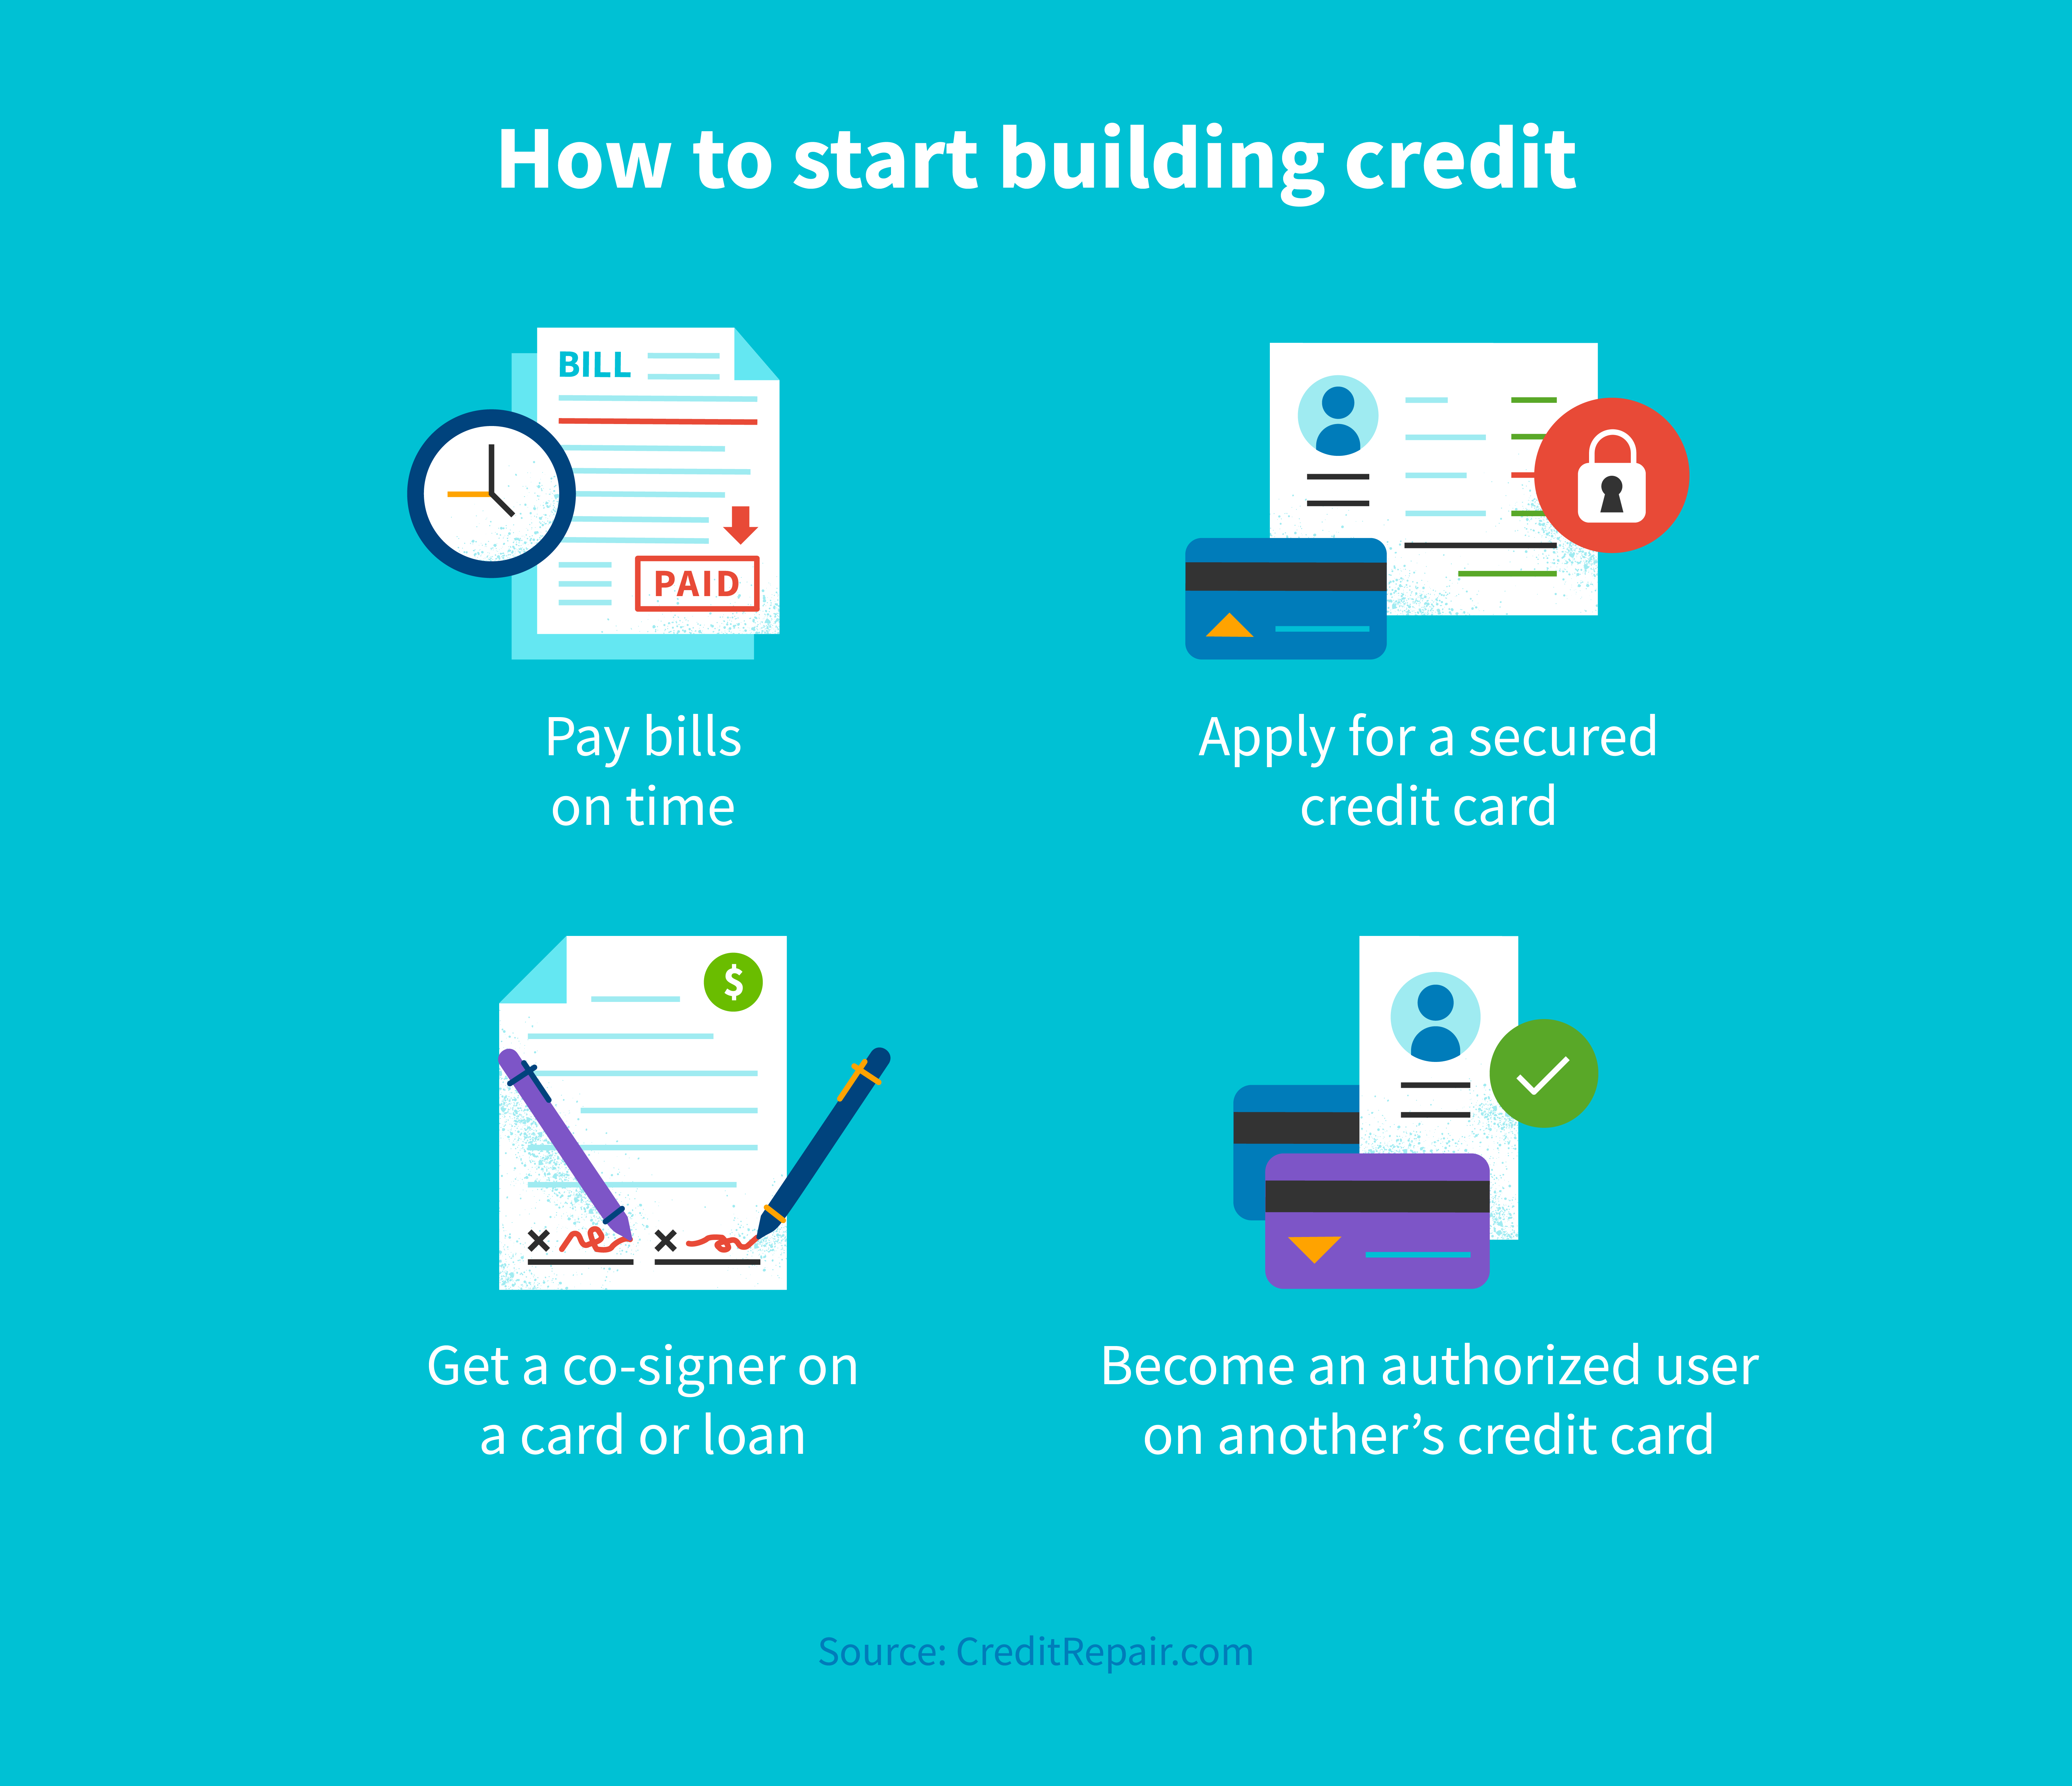 How to start building credit